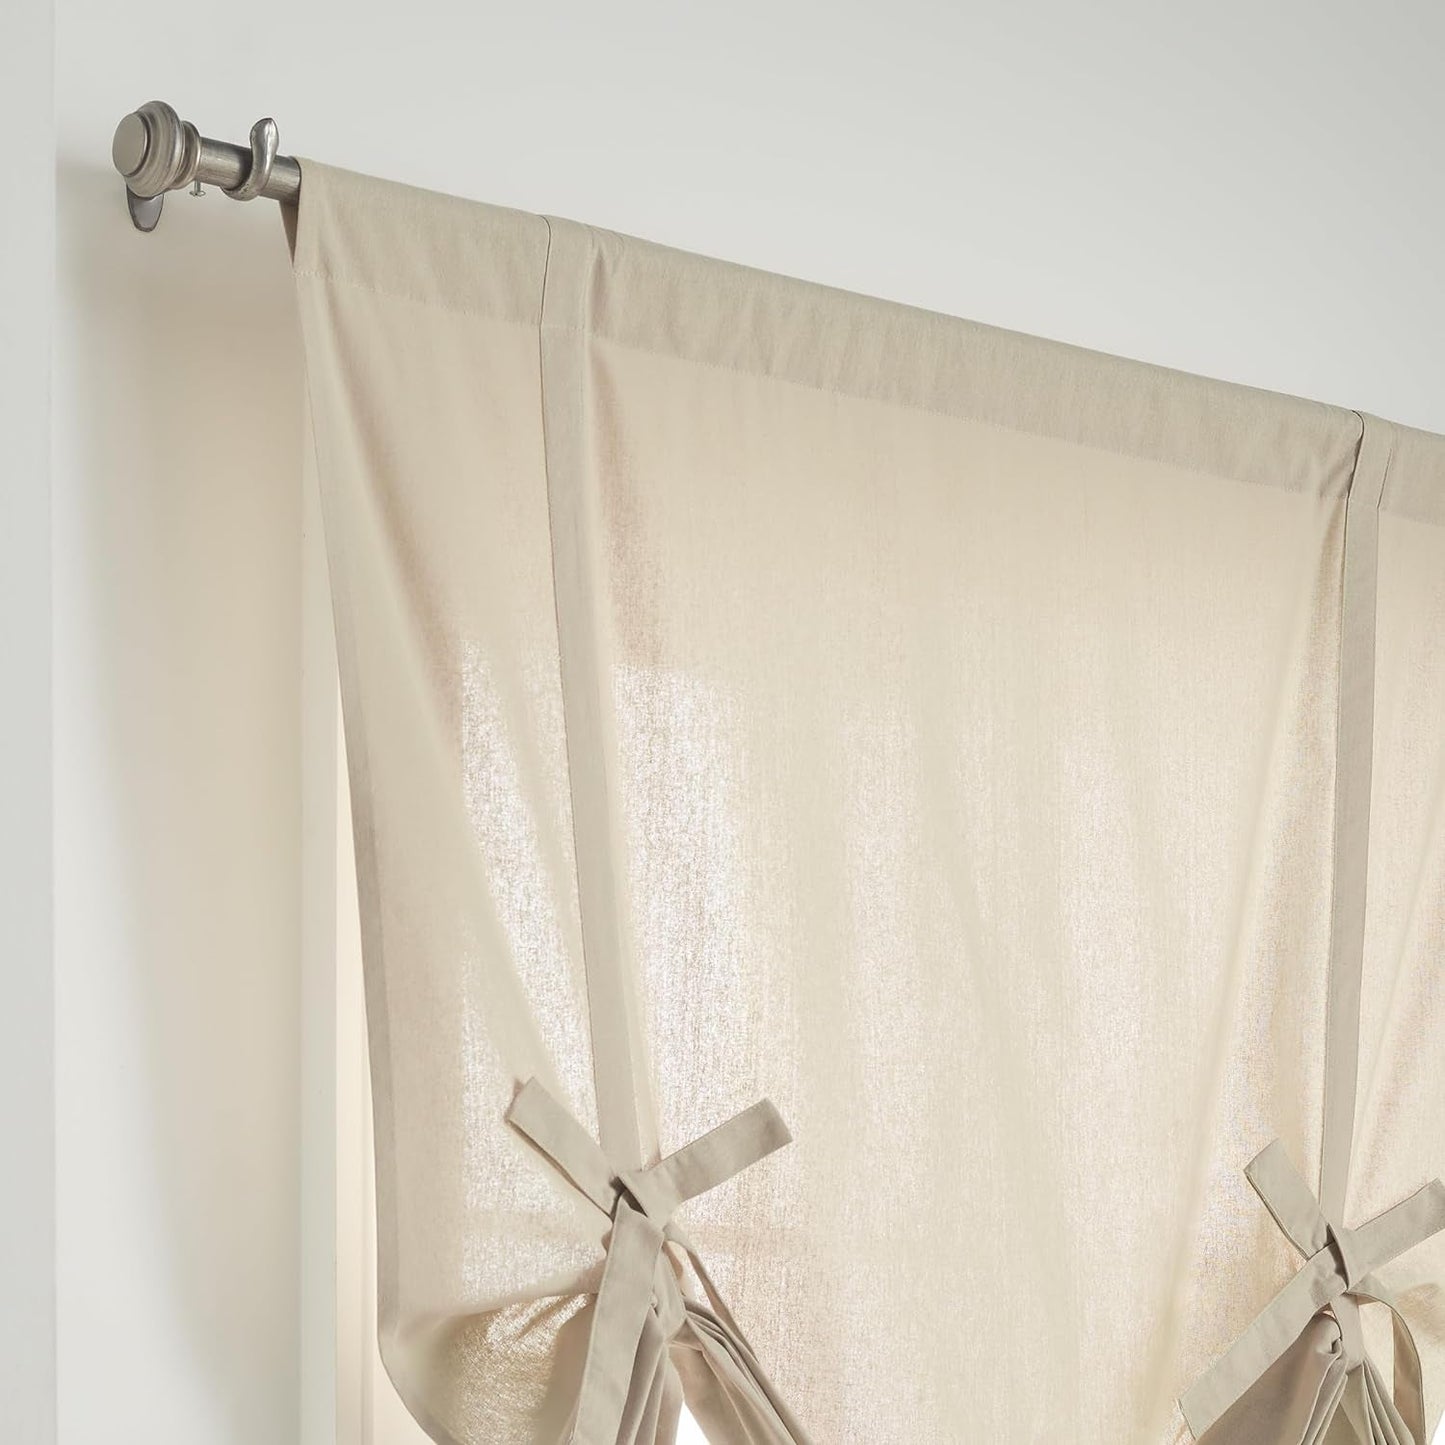 Drop Cloth Tie-Up Shade, Rod Pocket, Light Filtering Window Shade, 63 in Long X 42 in Wide, Linen